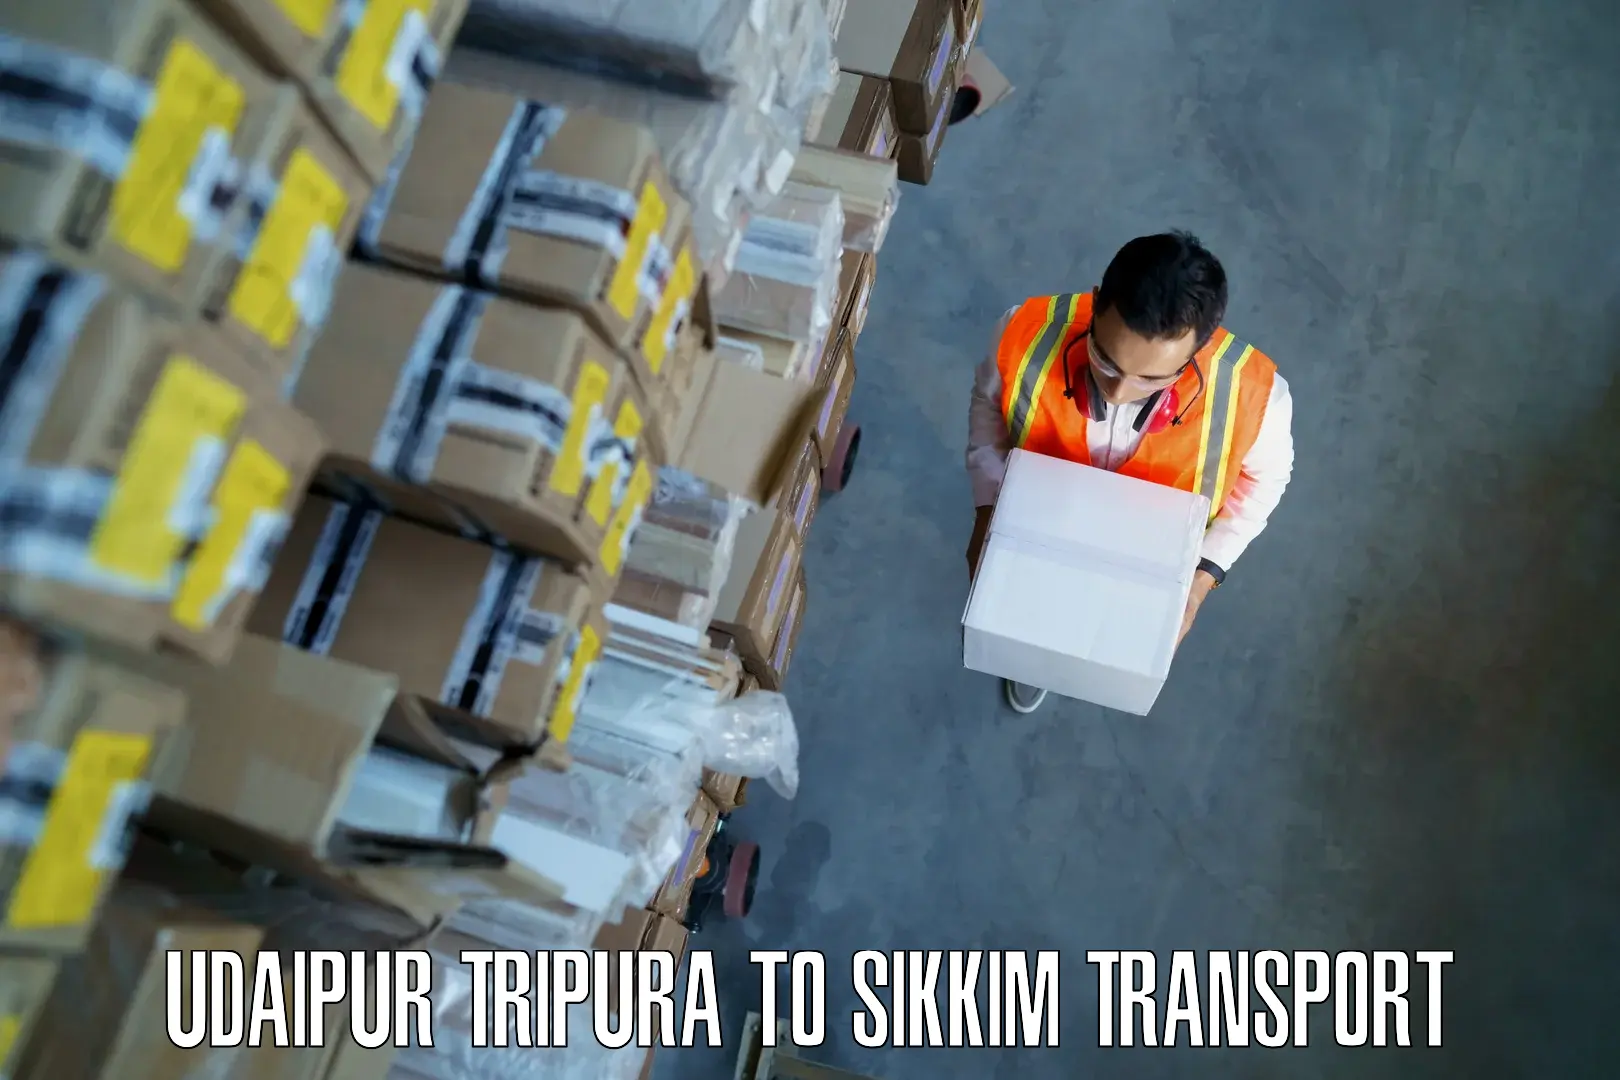 Part load transport service in India Udaipur Tripura to Geyzing